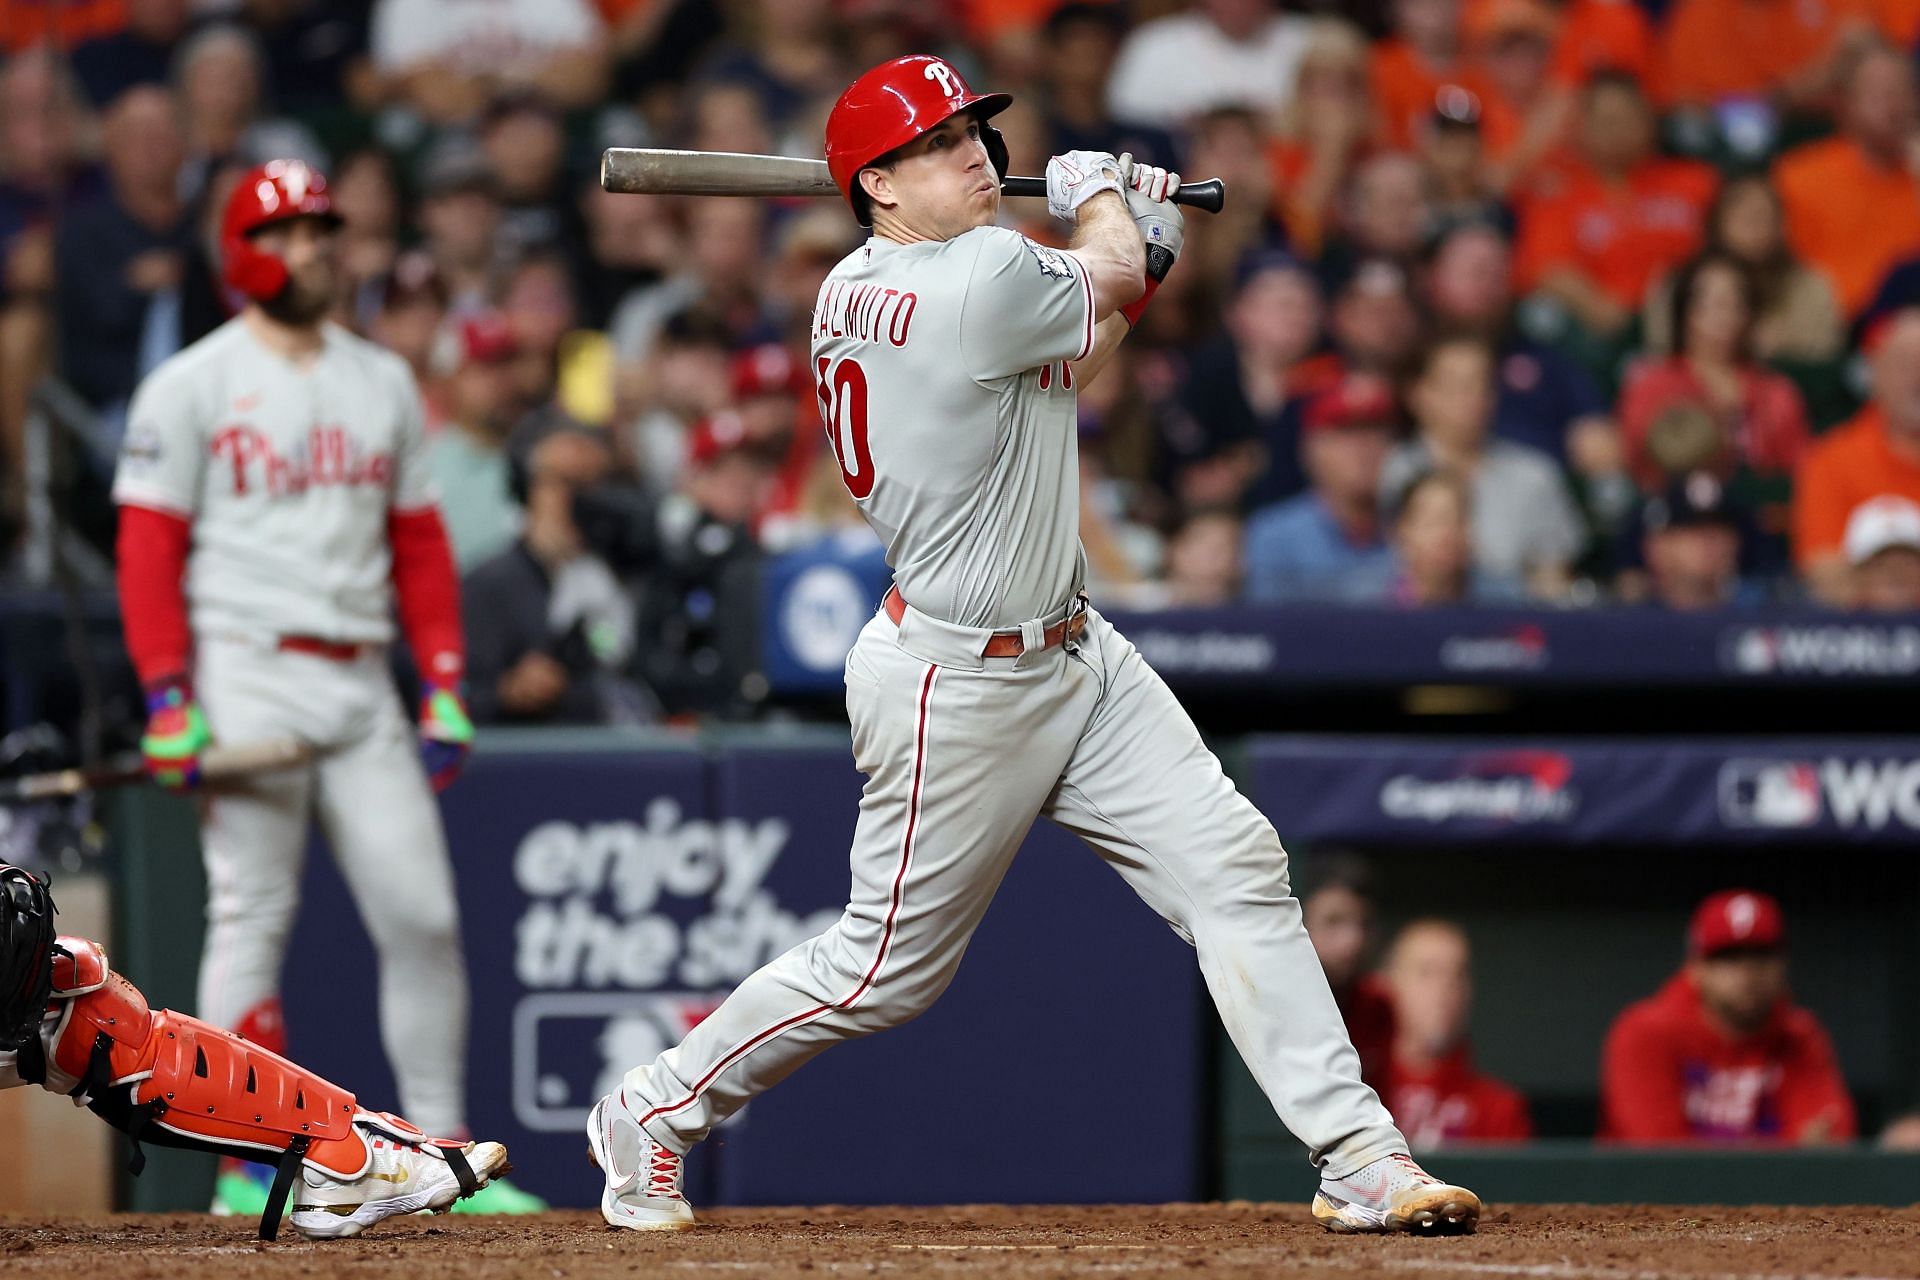 J.T. Realmuto hits a home run in the 10th inning against the Houston Astros in the 2022 World Series.